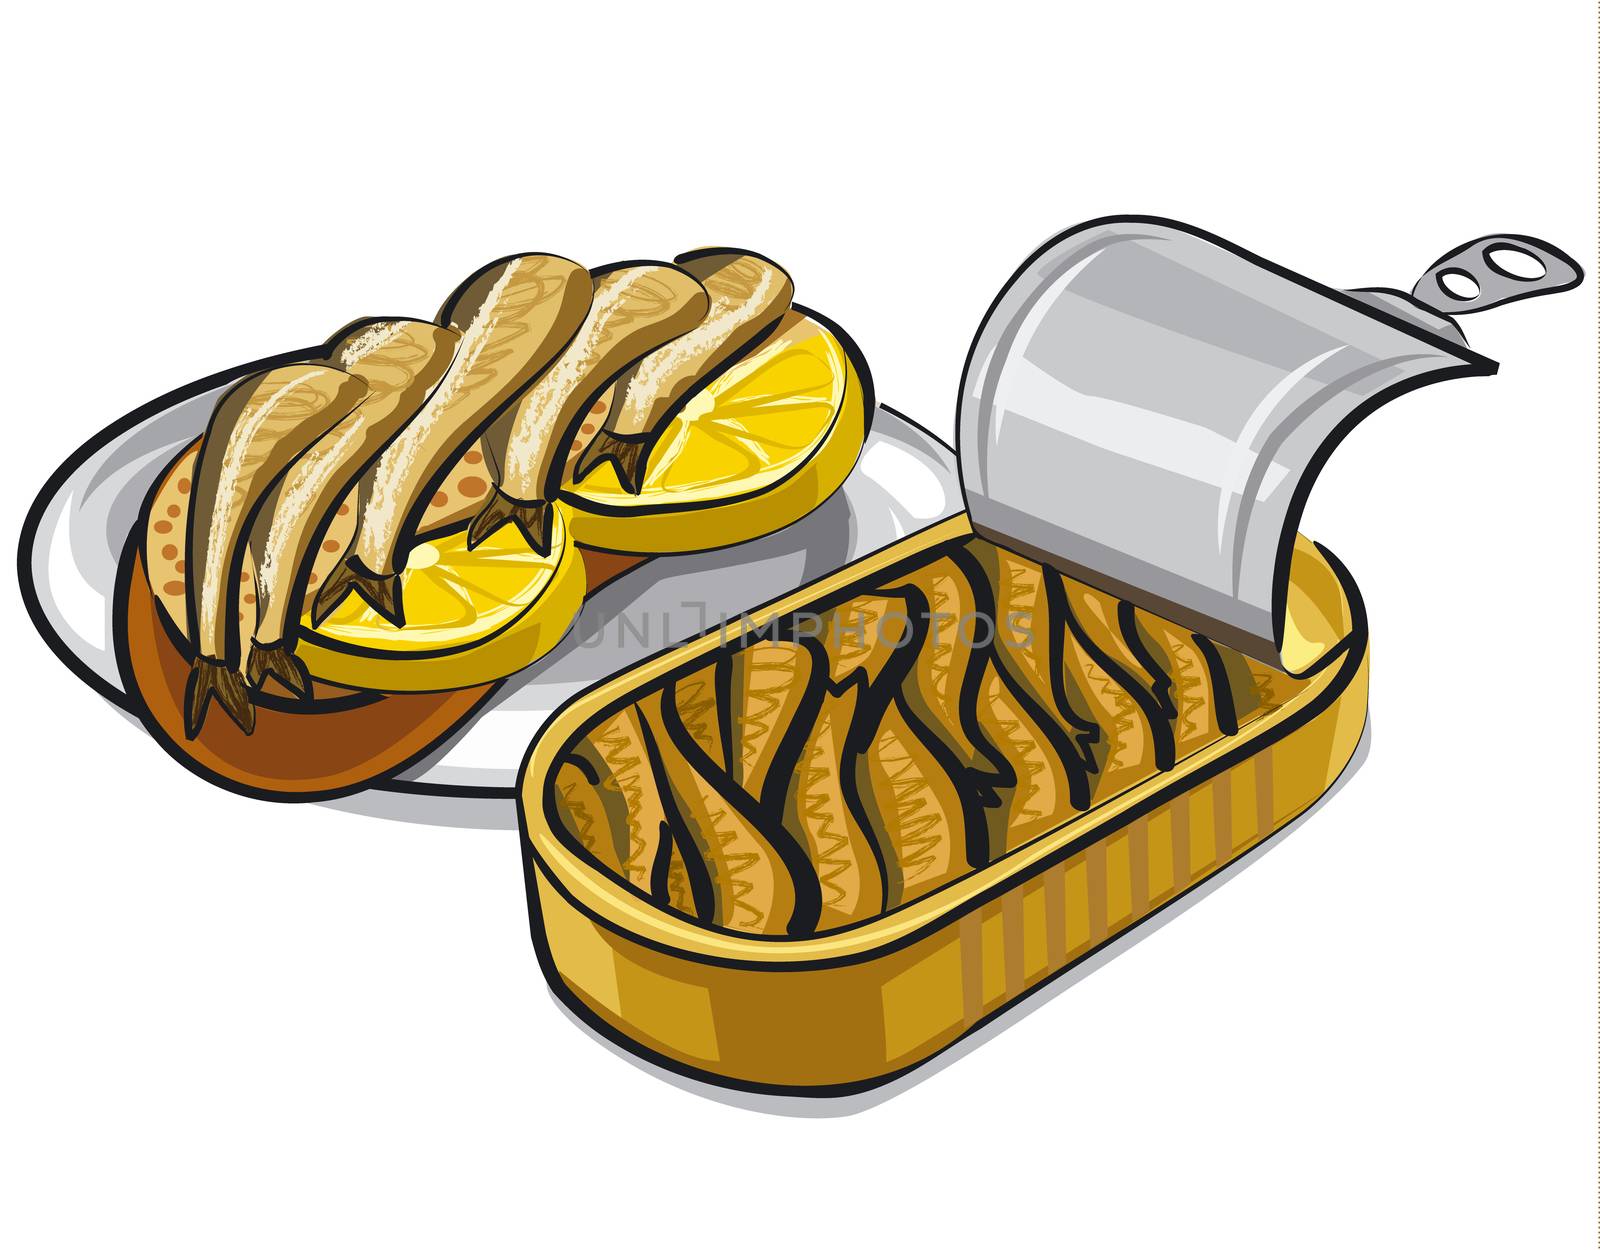 illustration of canned smoked sprats in oil with bread and llemons